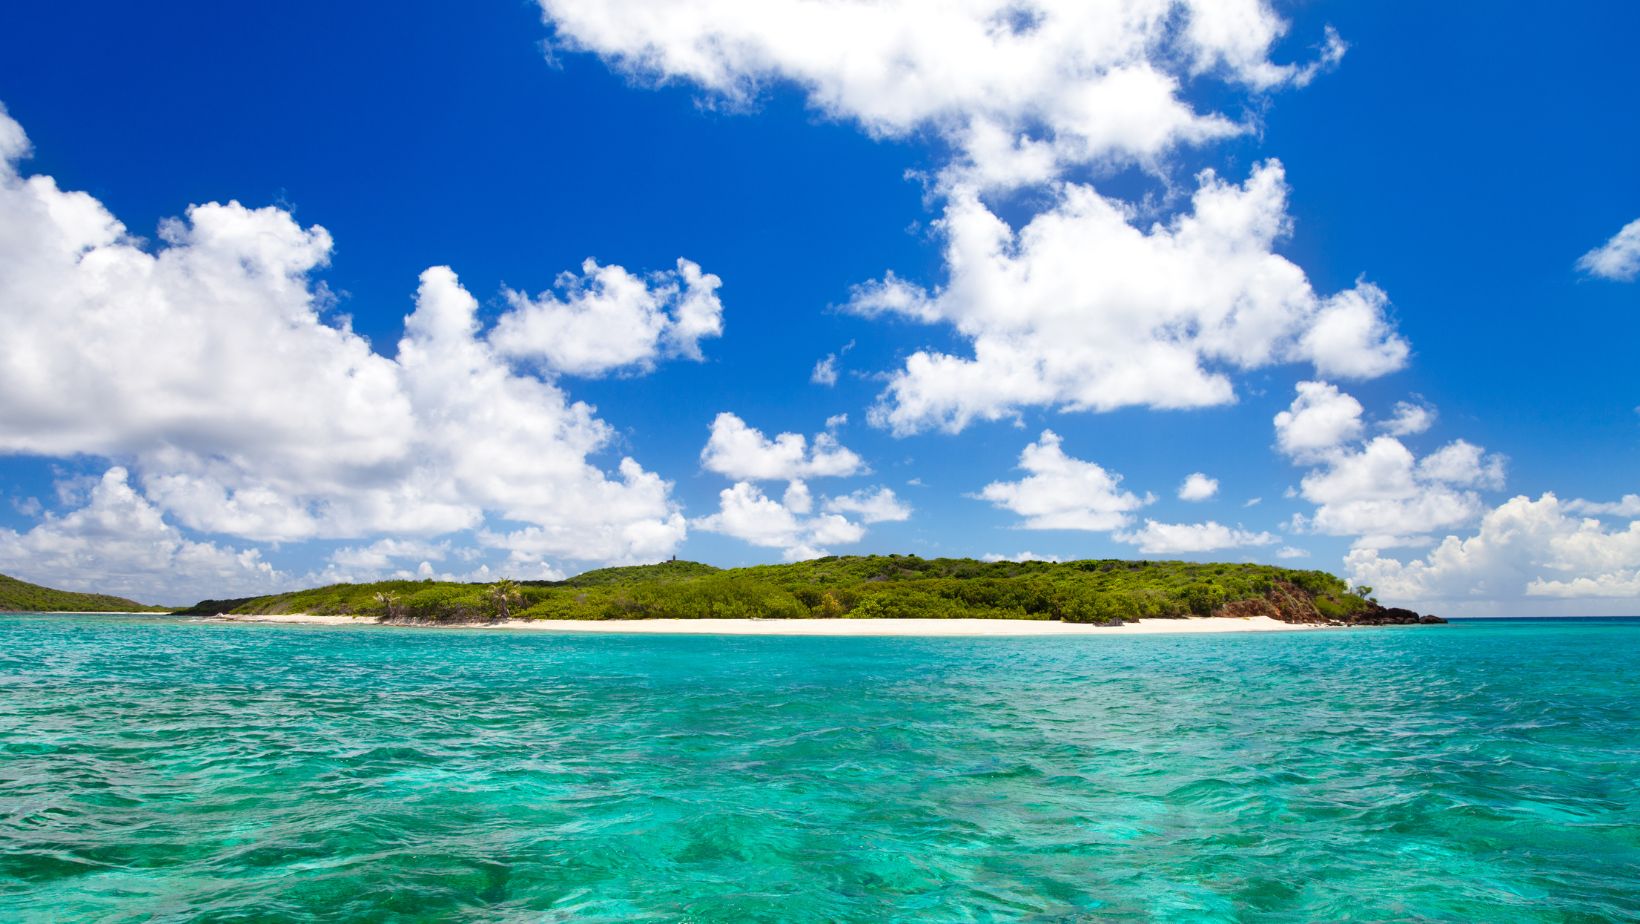 Visit Playa Tortuga on Culebrita for a beach day paradise in the Spanish Virgin Islands.